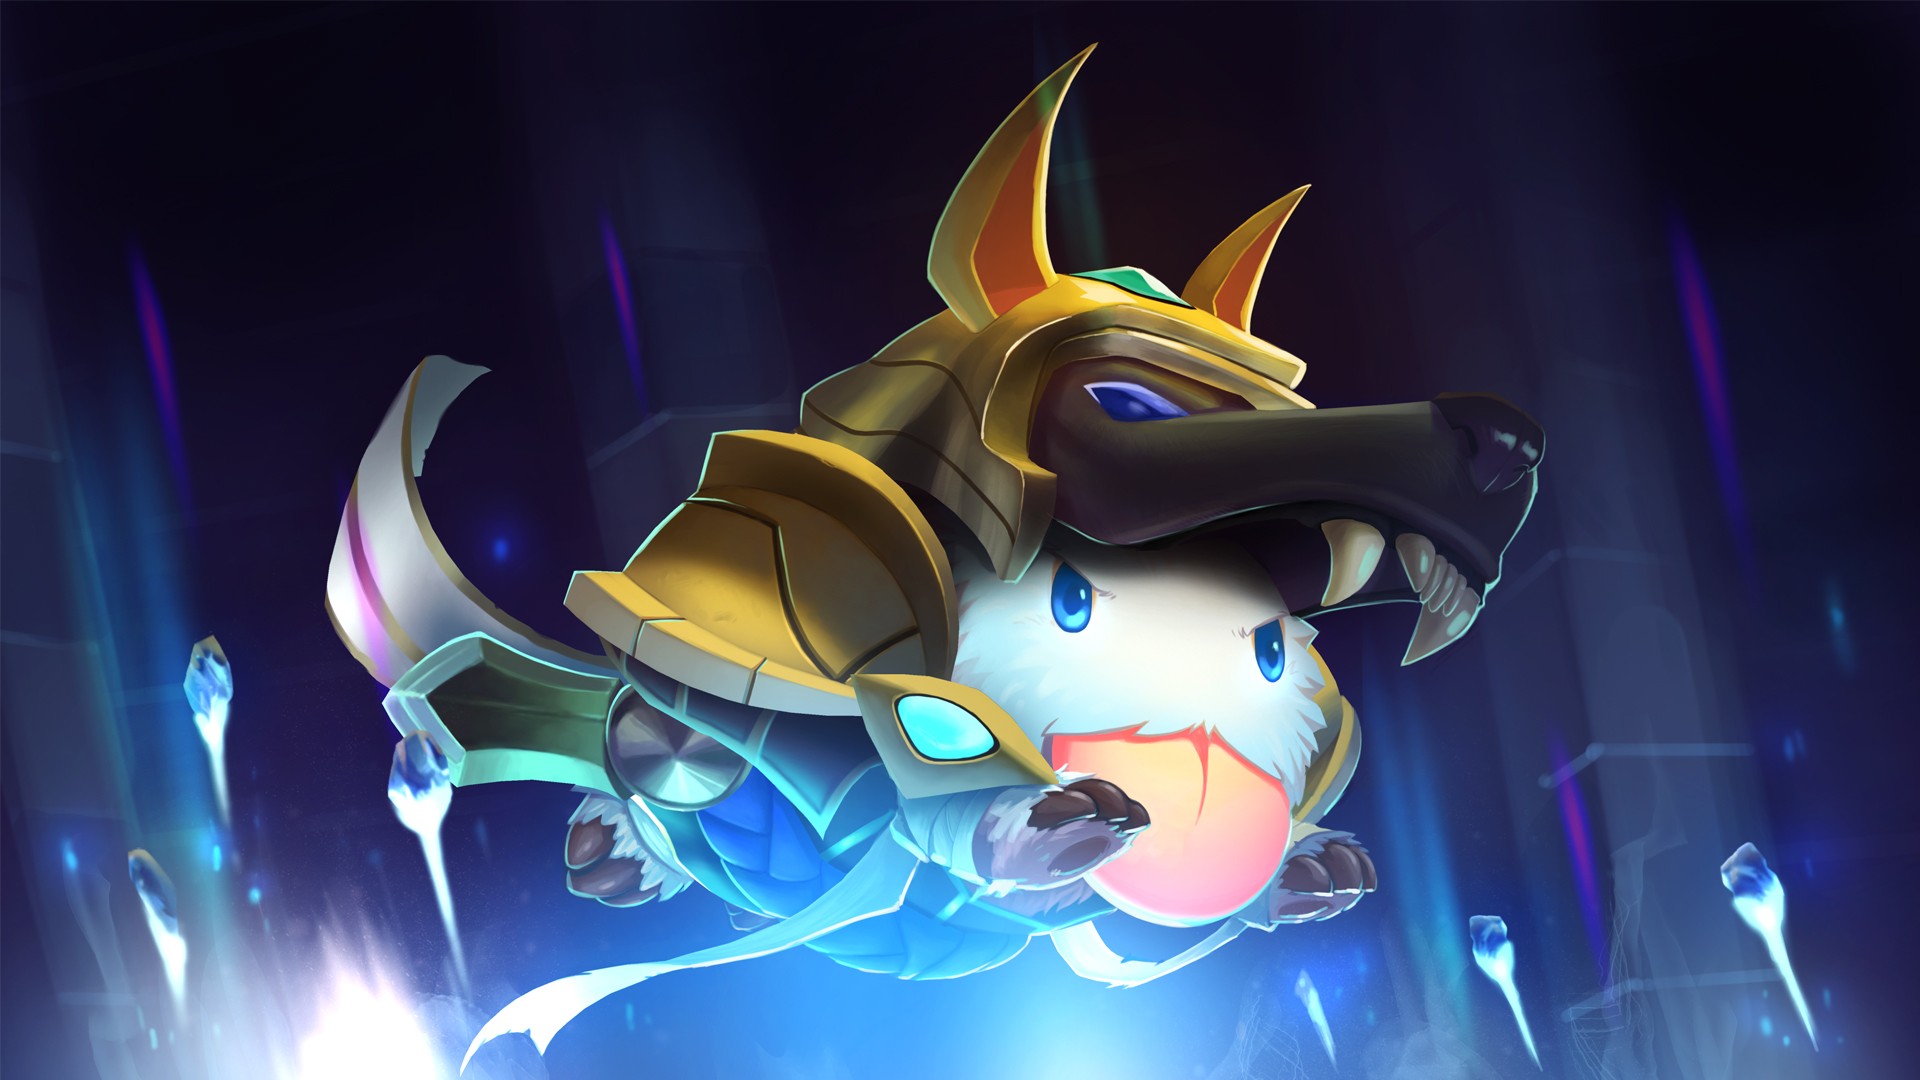 General 1920x1080 League of Legends video game art PC gaming Nasus (League of Legends) Poro (League of Legends) video game characters